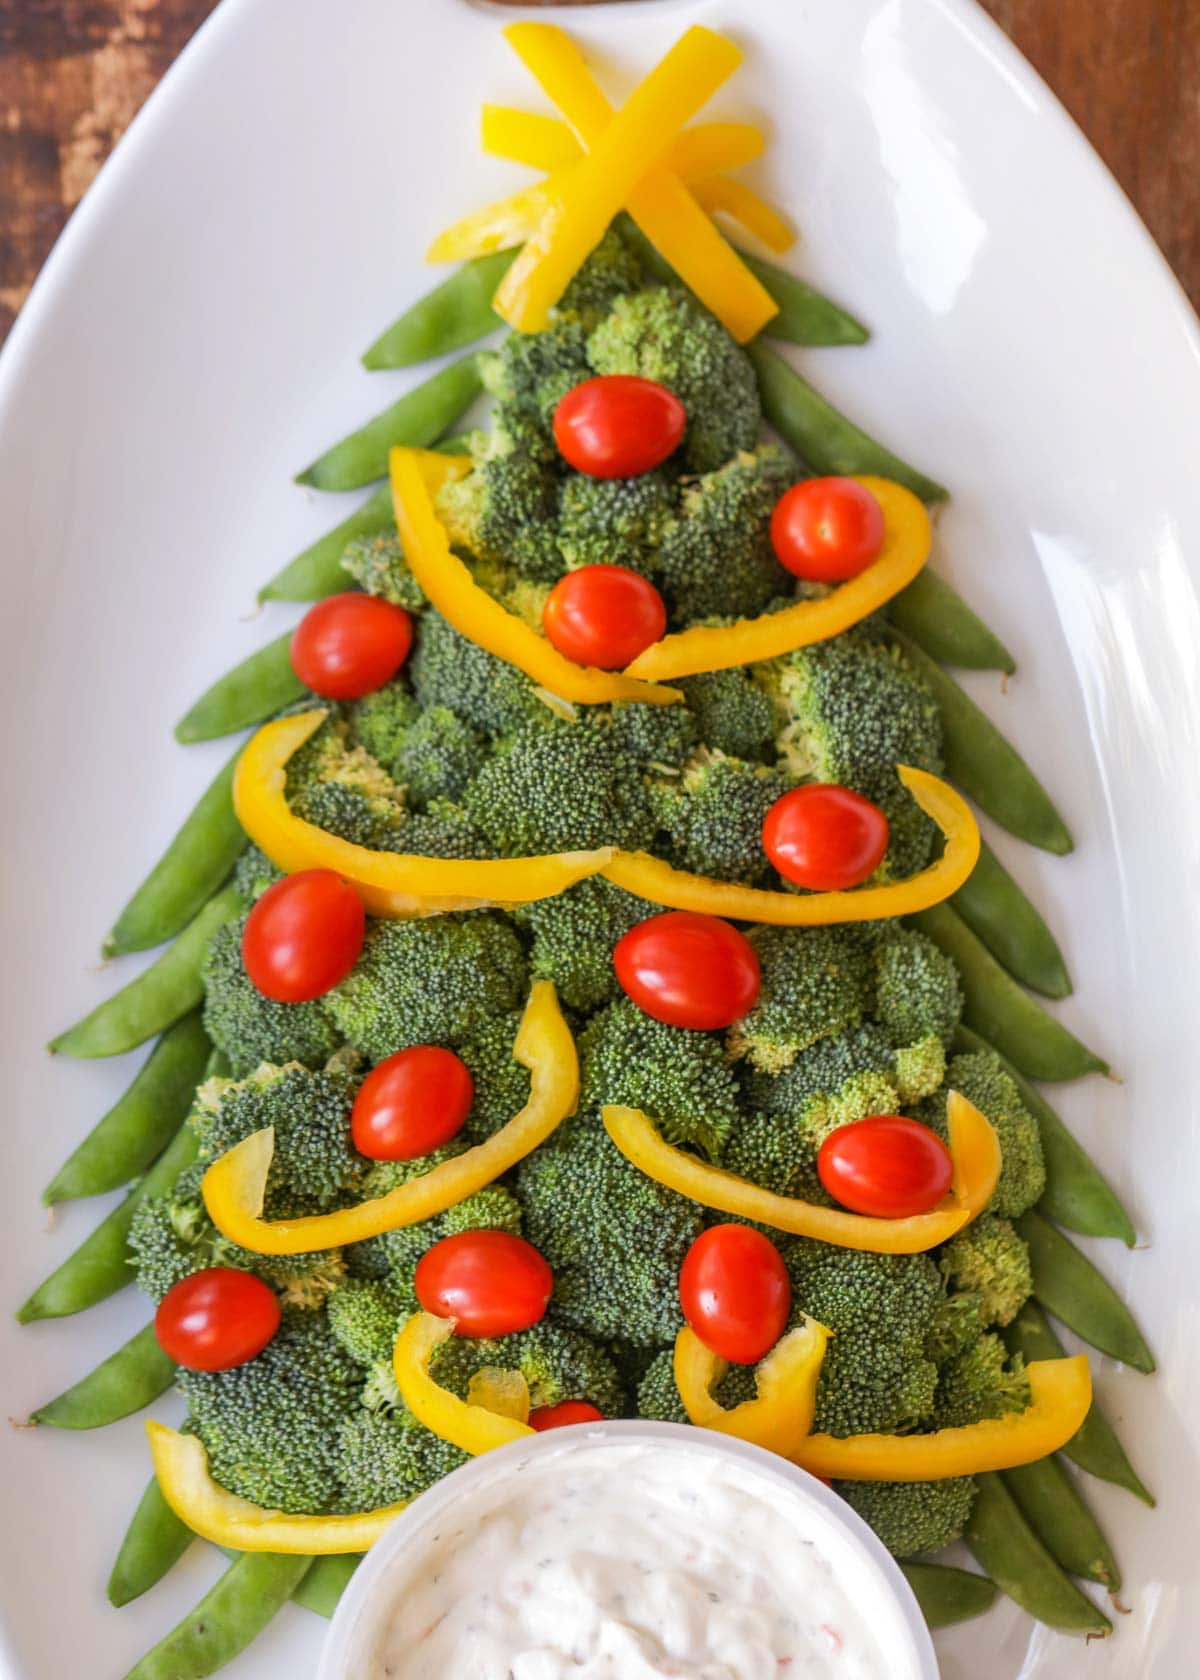 Christmas veggie tray shaped like a tree and served with dip.